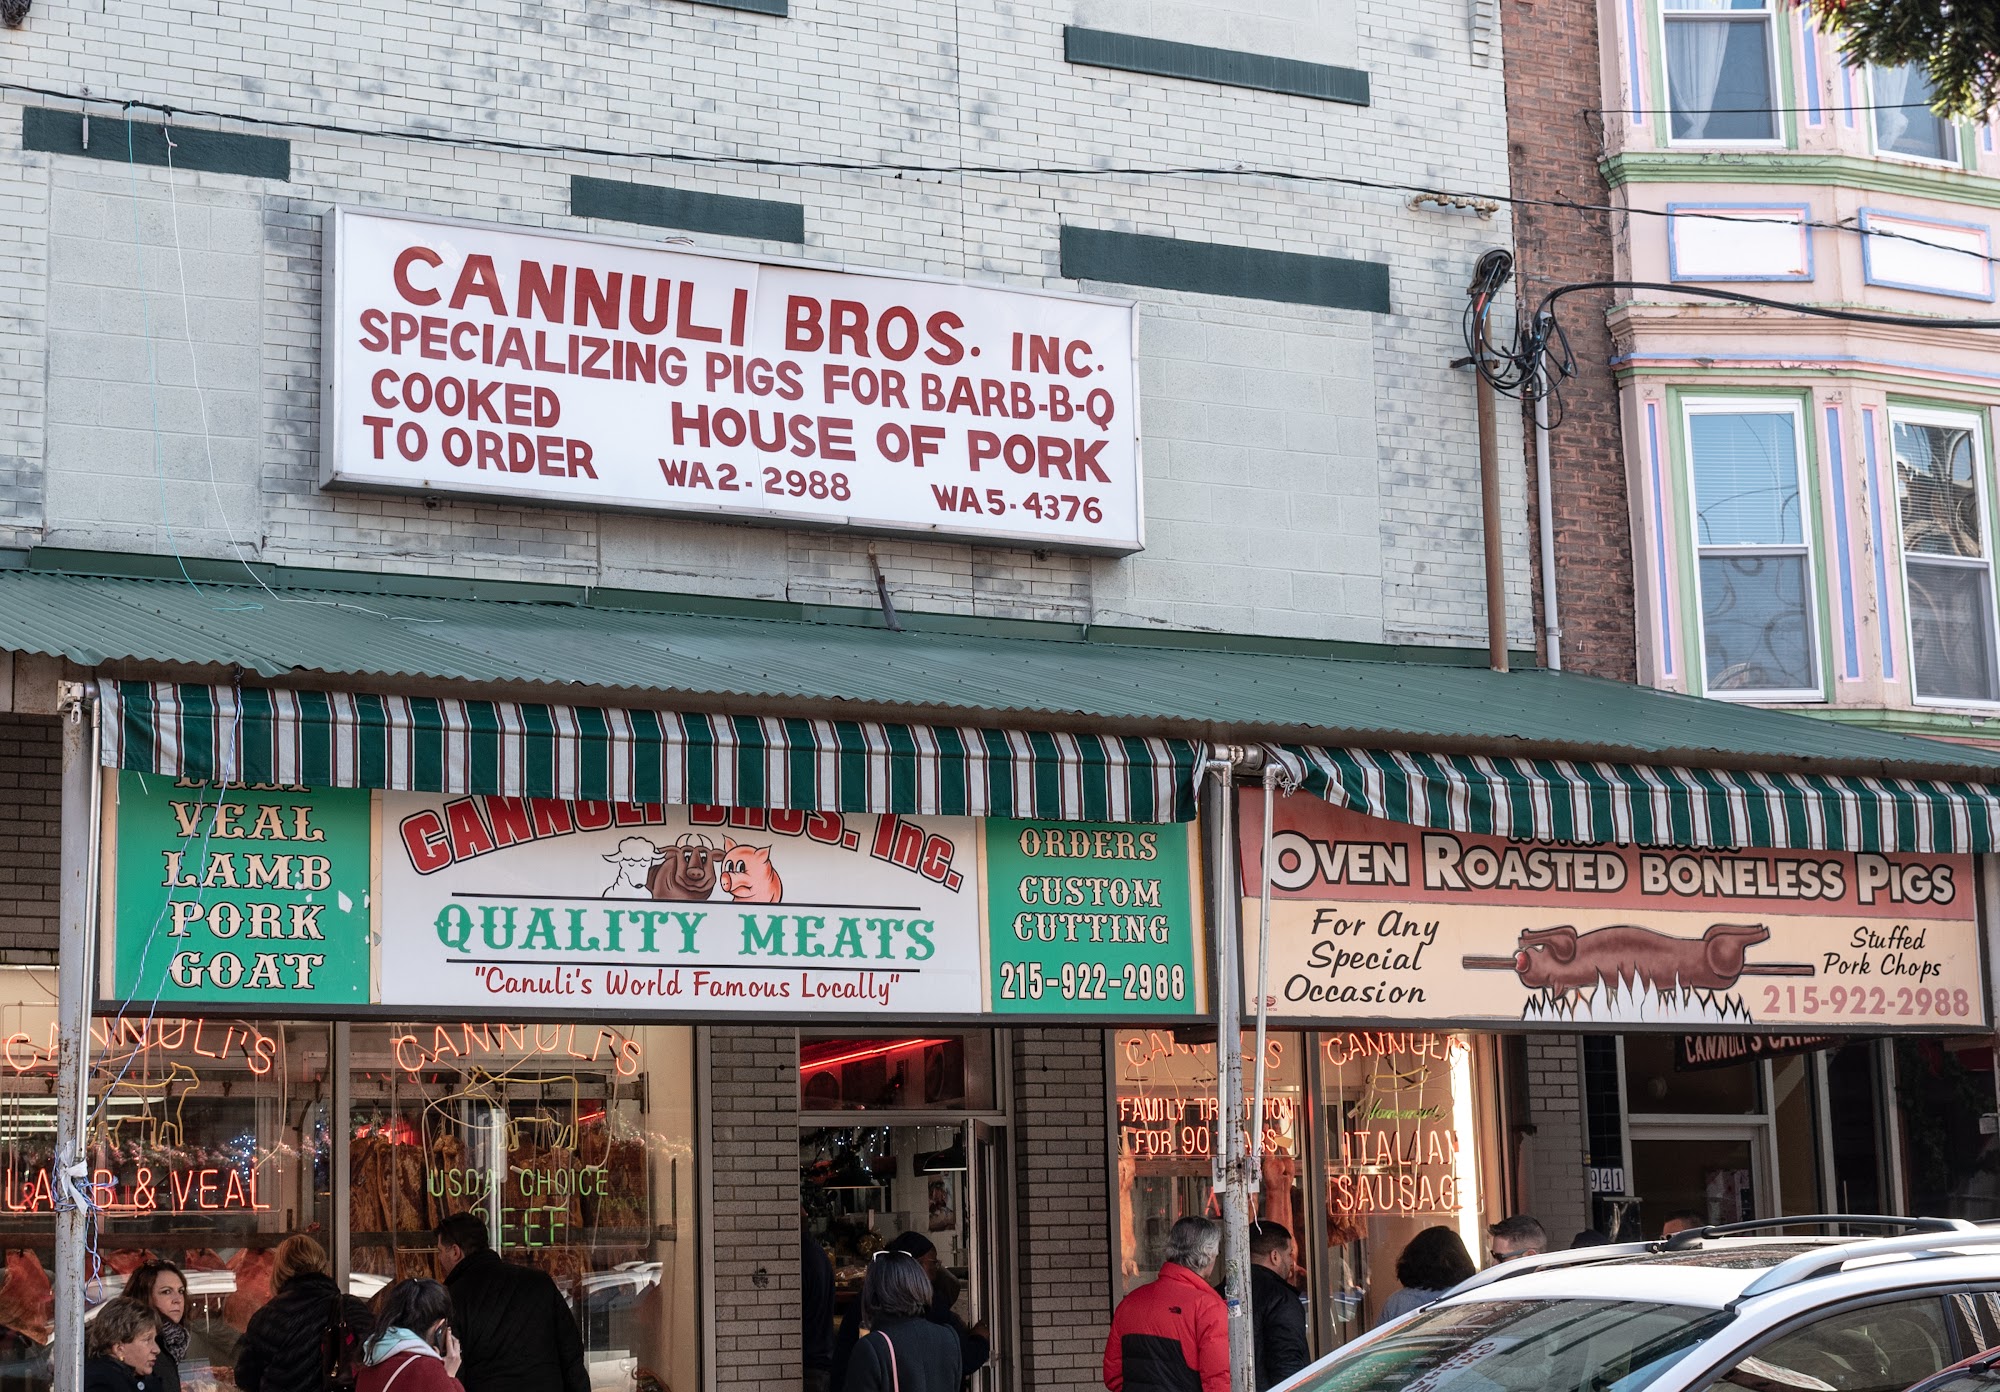 Cannuli's Quality Meats and Poultry